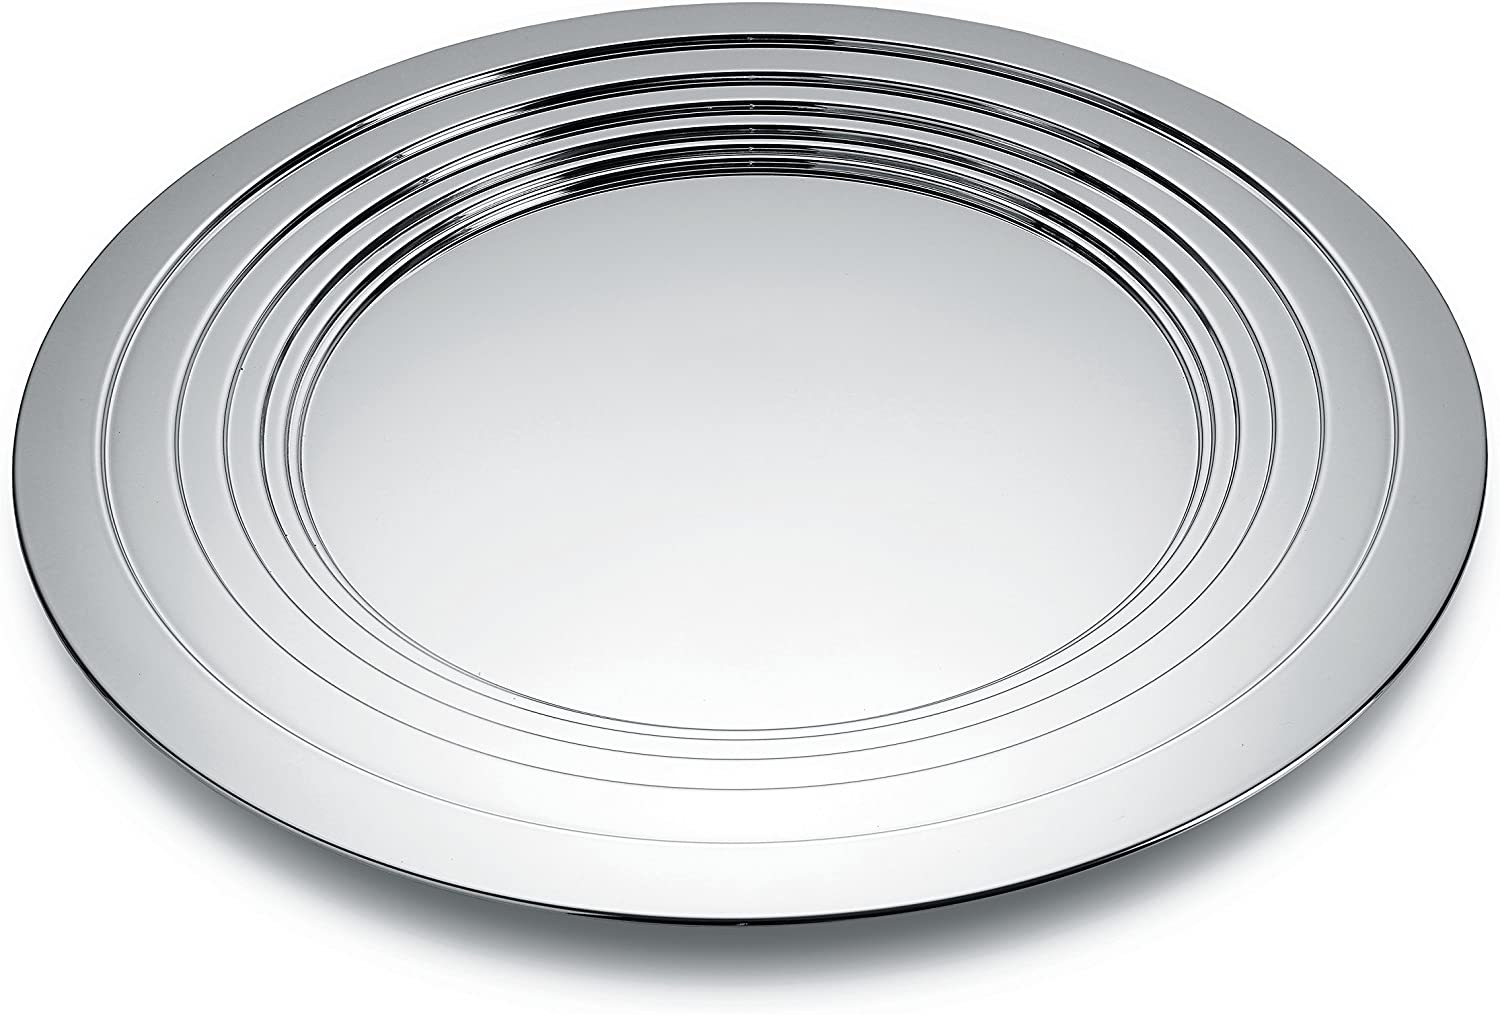 Alessi MDL03 Table, Tray, Stainless Steel, Silver